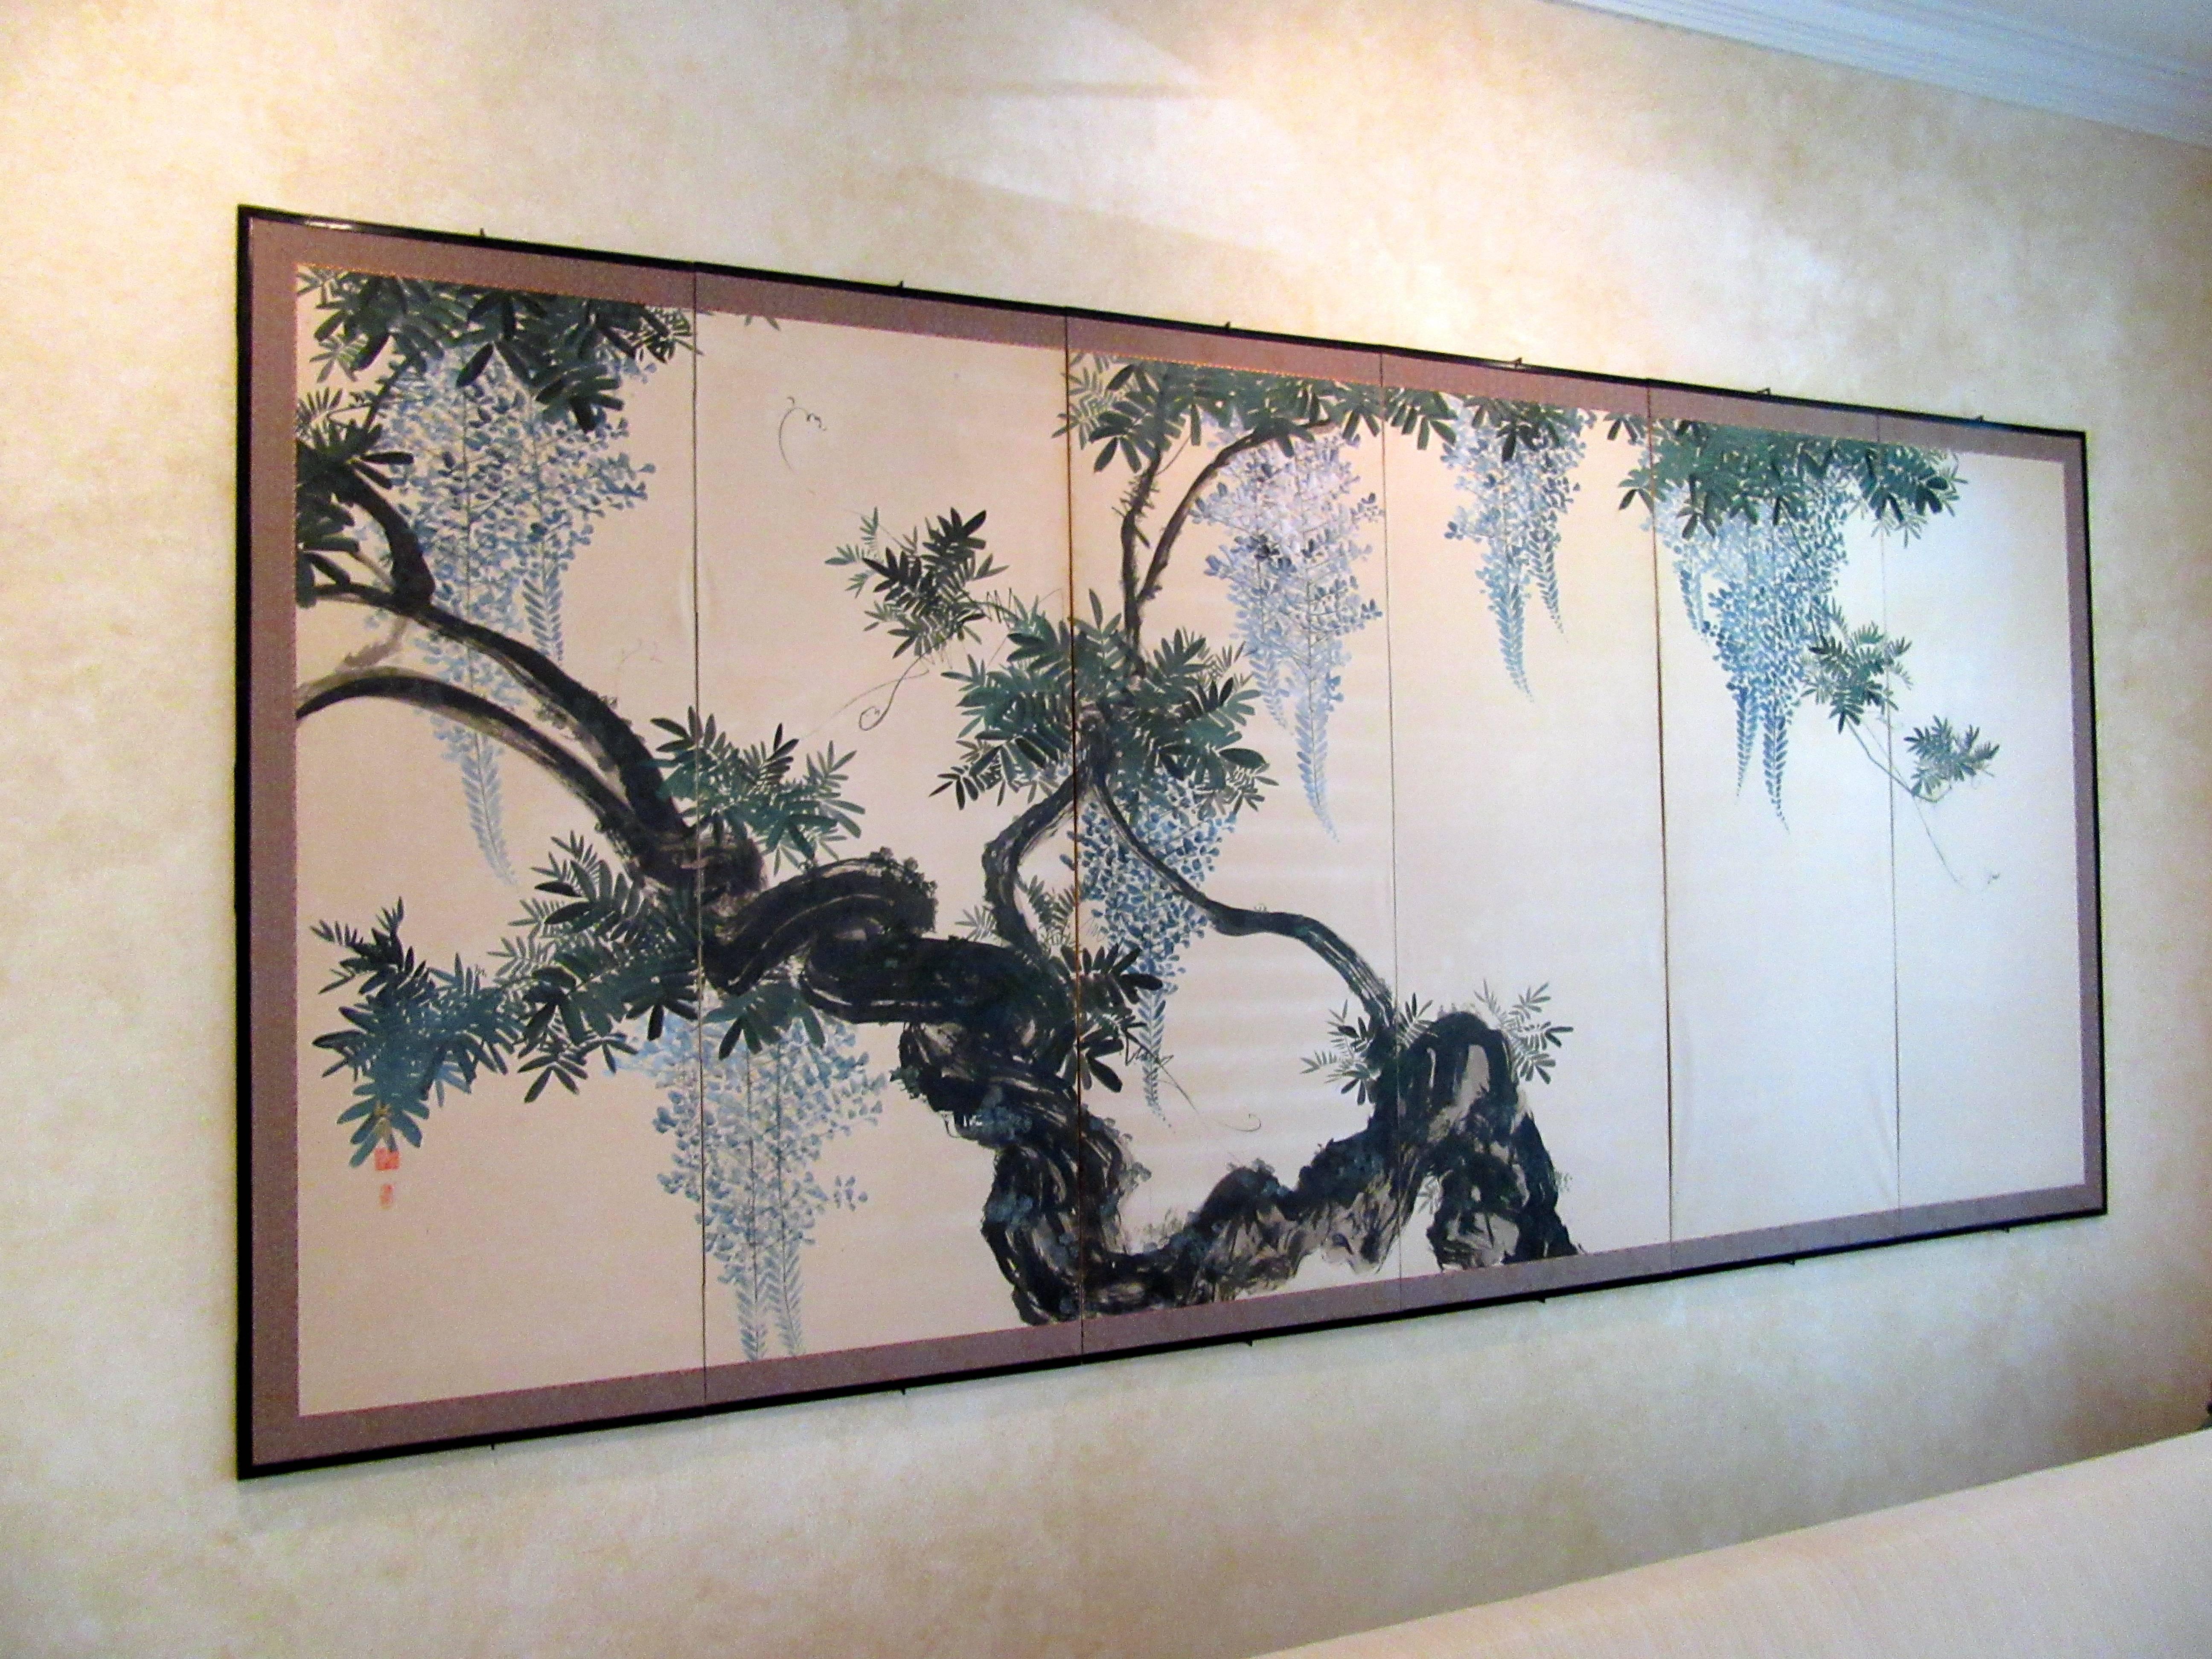 Antique six panel folding screen (Byobu) in ink and colors on paper, mounted on wooden frames with paper hinges, brcade borderand lacquered molding, depicting gnarled trunk and gracefully twisted vines of wisteria in full bloom.
Era: Early 20th